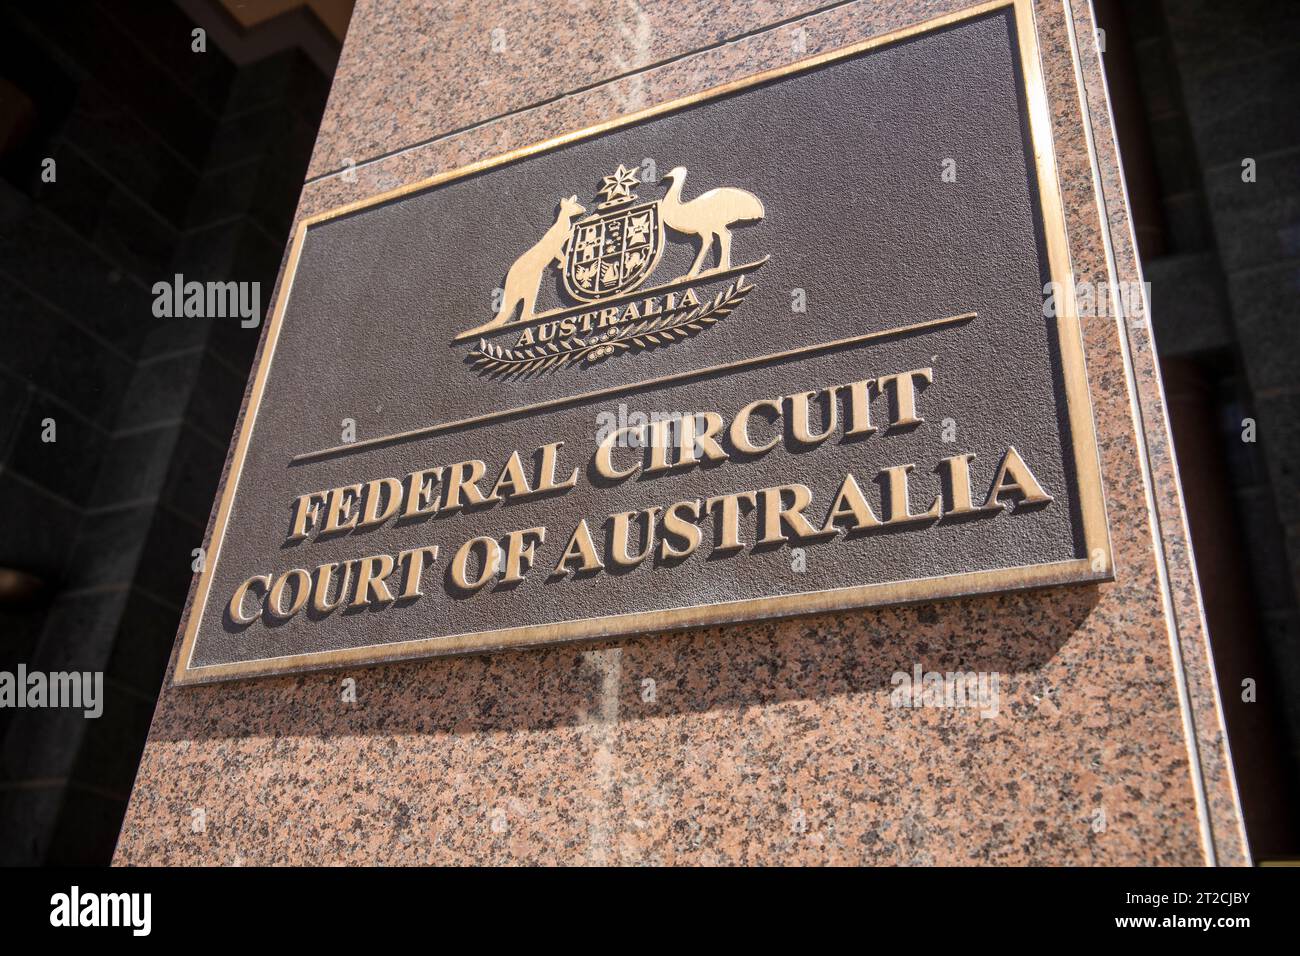 Federal Circuit Court of Australia, entrance plaque at the Lionel Bowen building in Sydney city centre,New South Wales,Australia Stock Photo